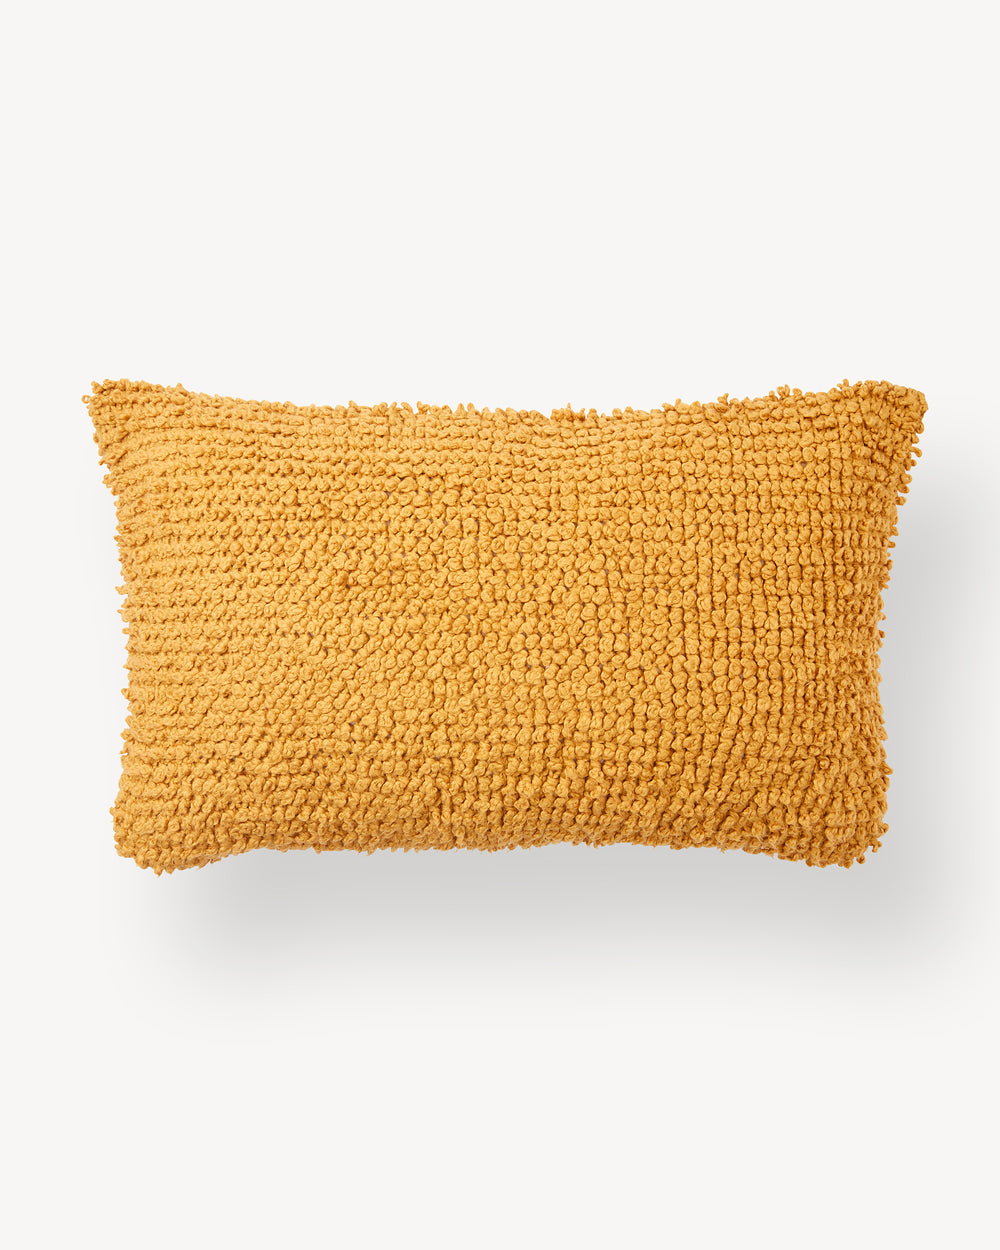 Cloud Throw Pillow in Goldenrod - Ethical Home Decor